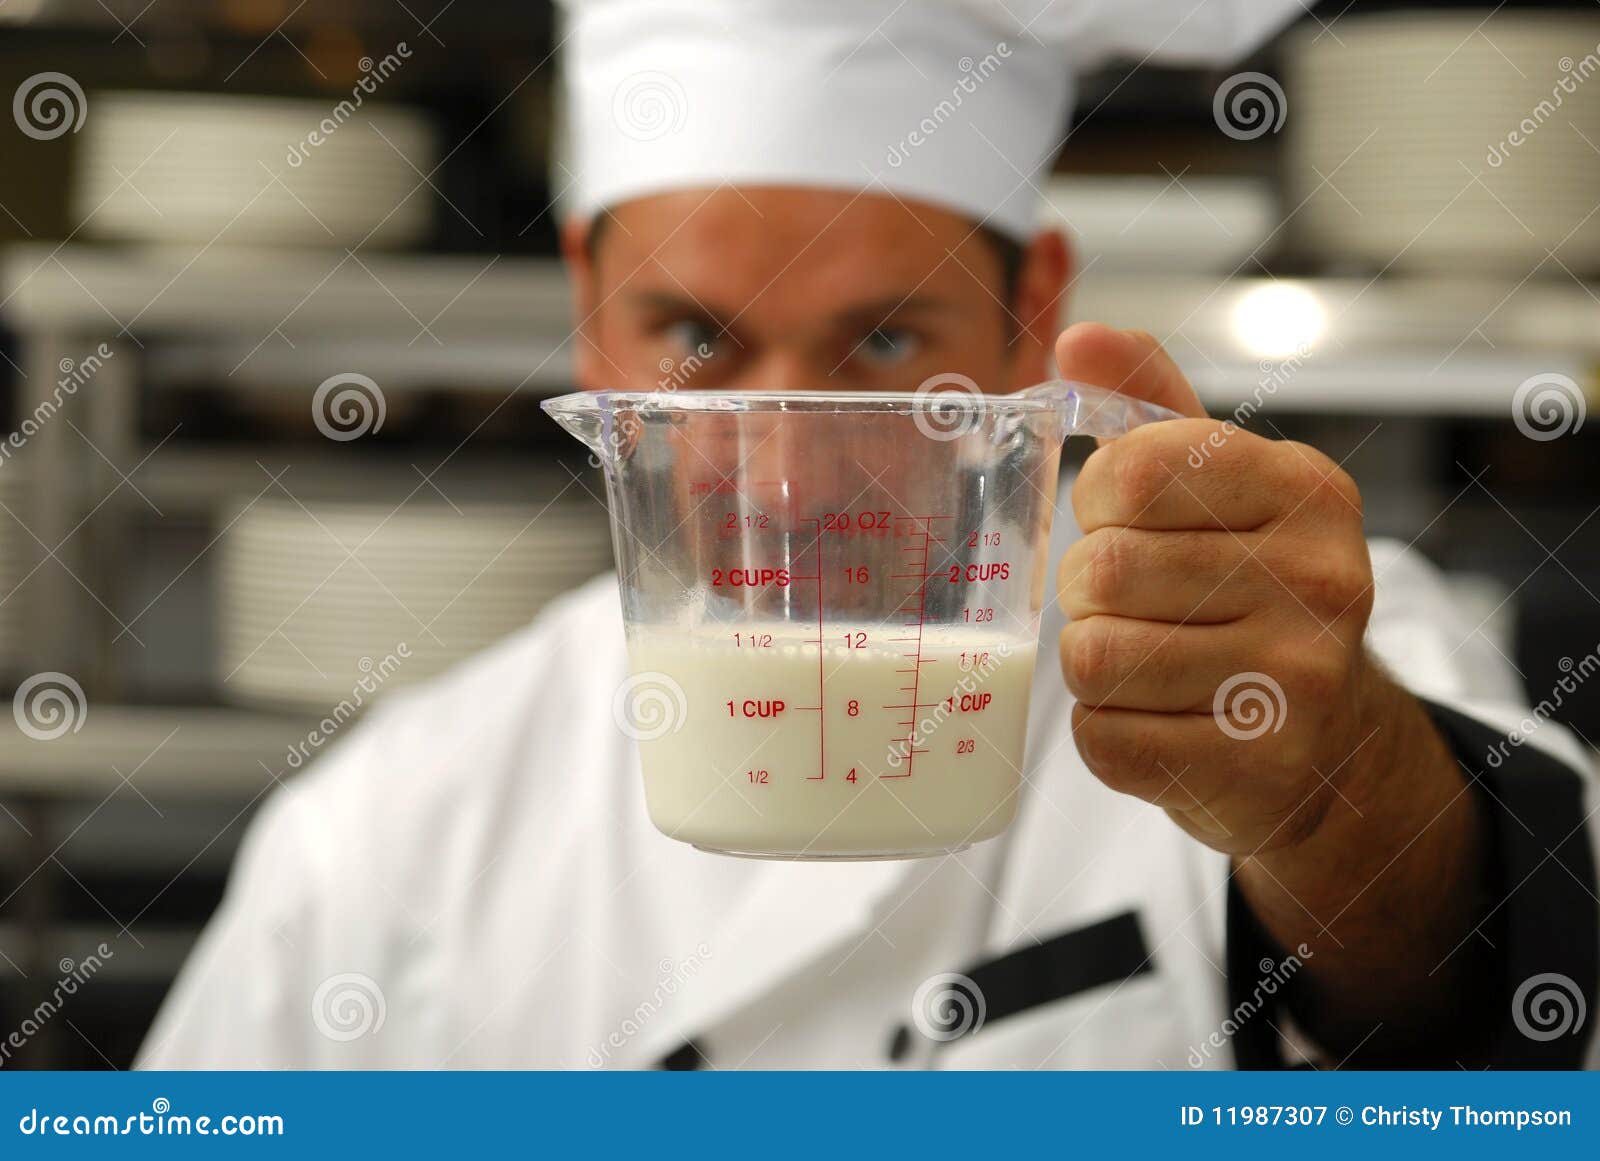 Measuring Cup of Milk Coffee Mug by CSA Images - Pixels